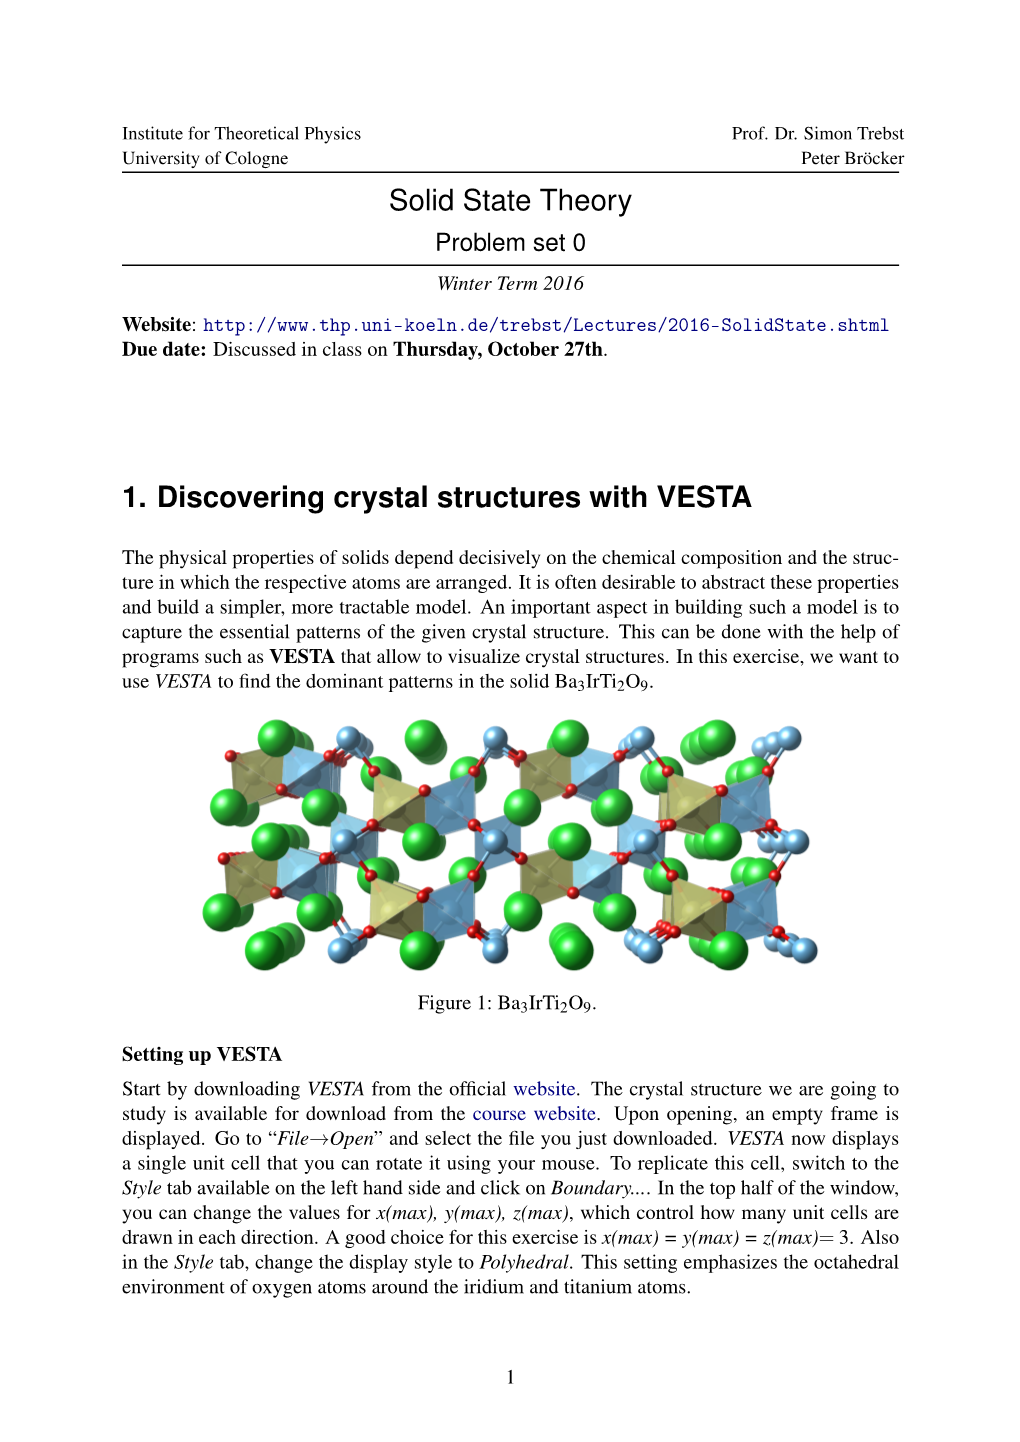 Solid State Theory 1. Discovering Crystal Structures with VESTA